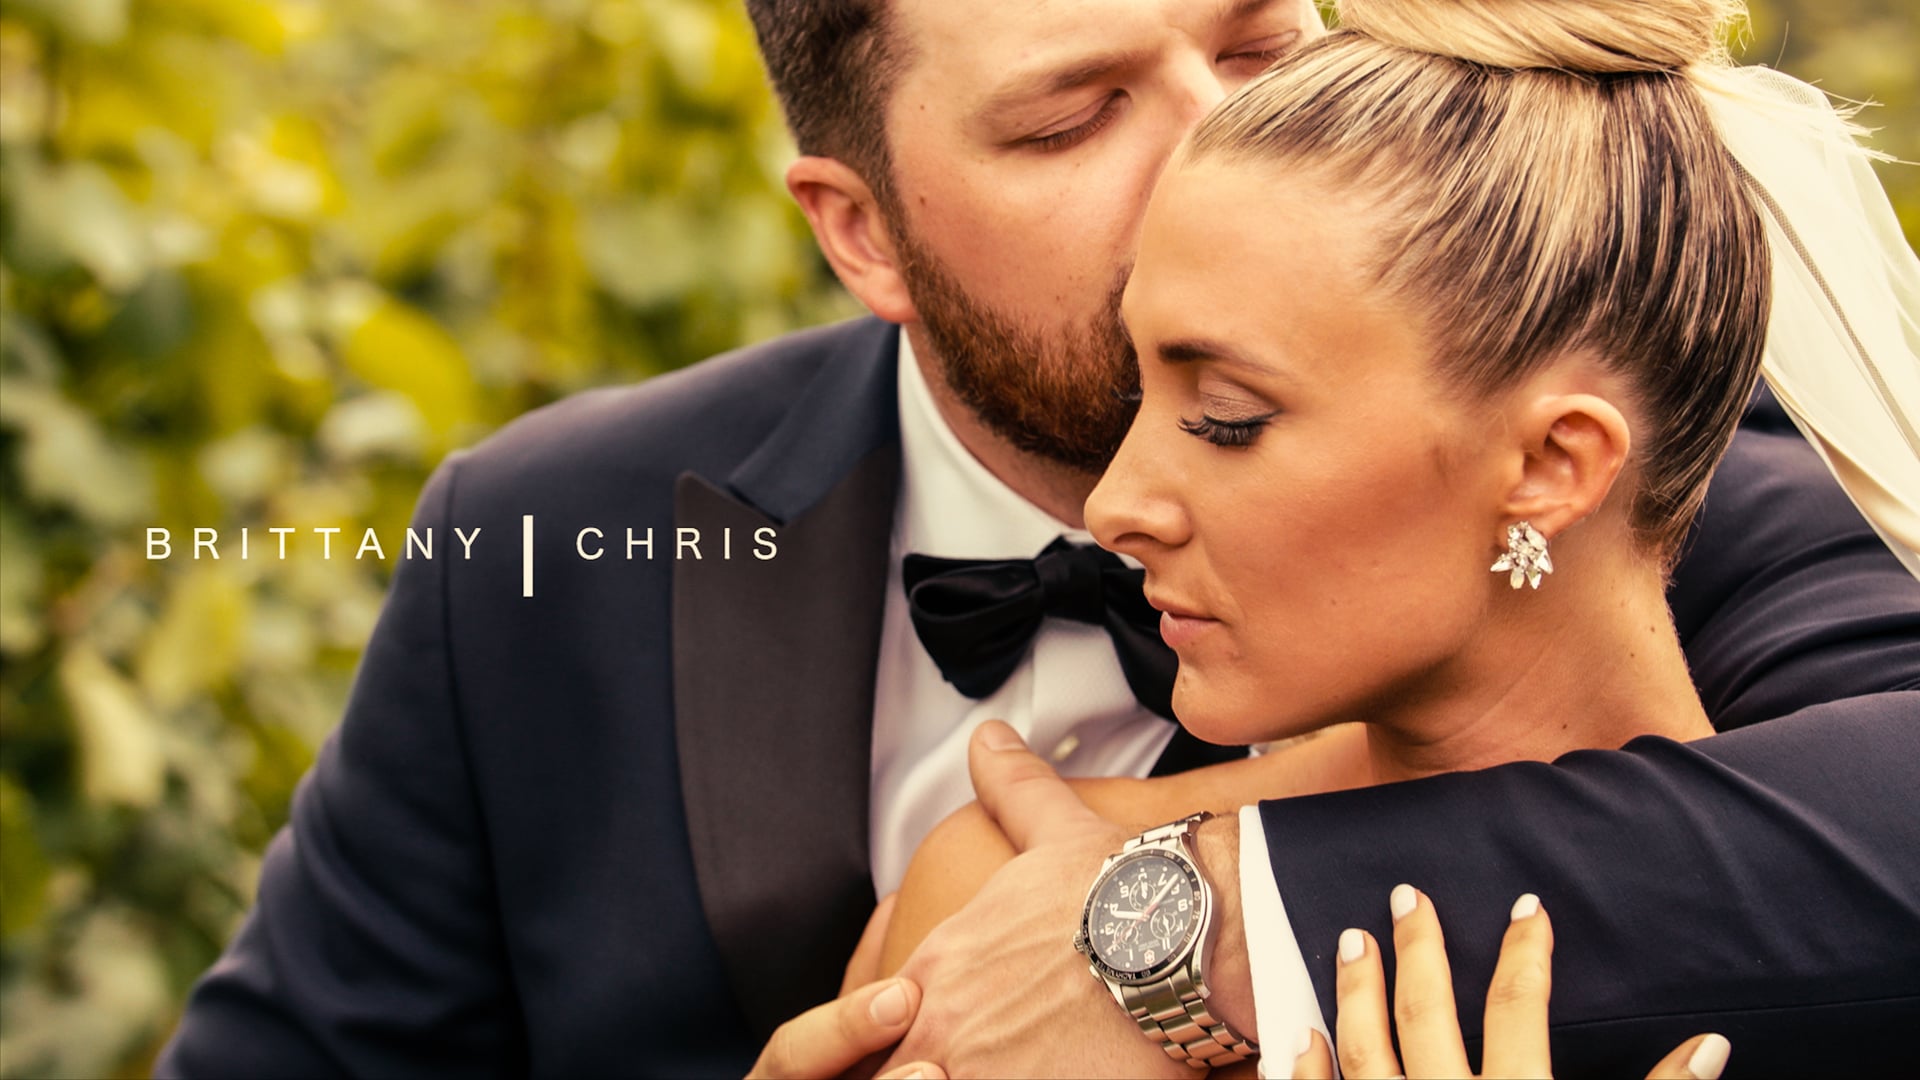 Brittany and Chris' Wedding Highlight Film